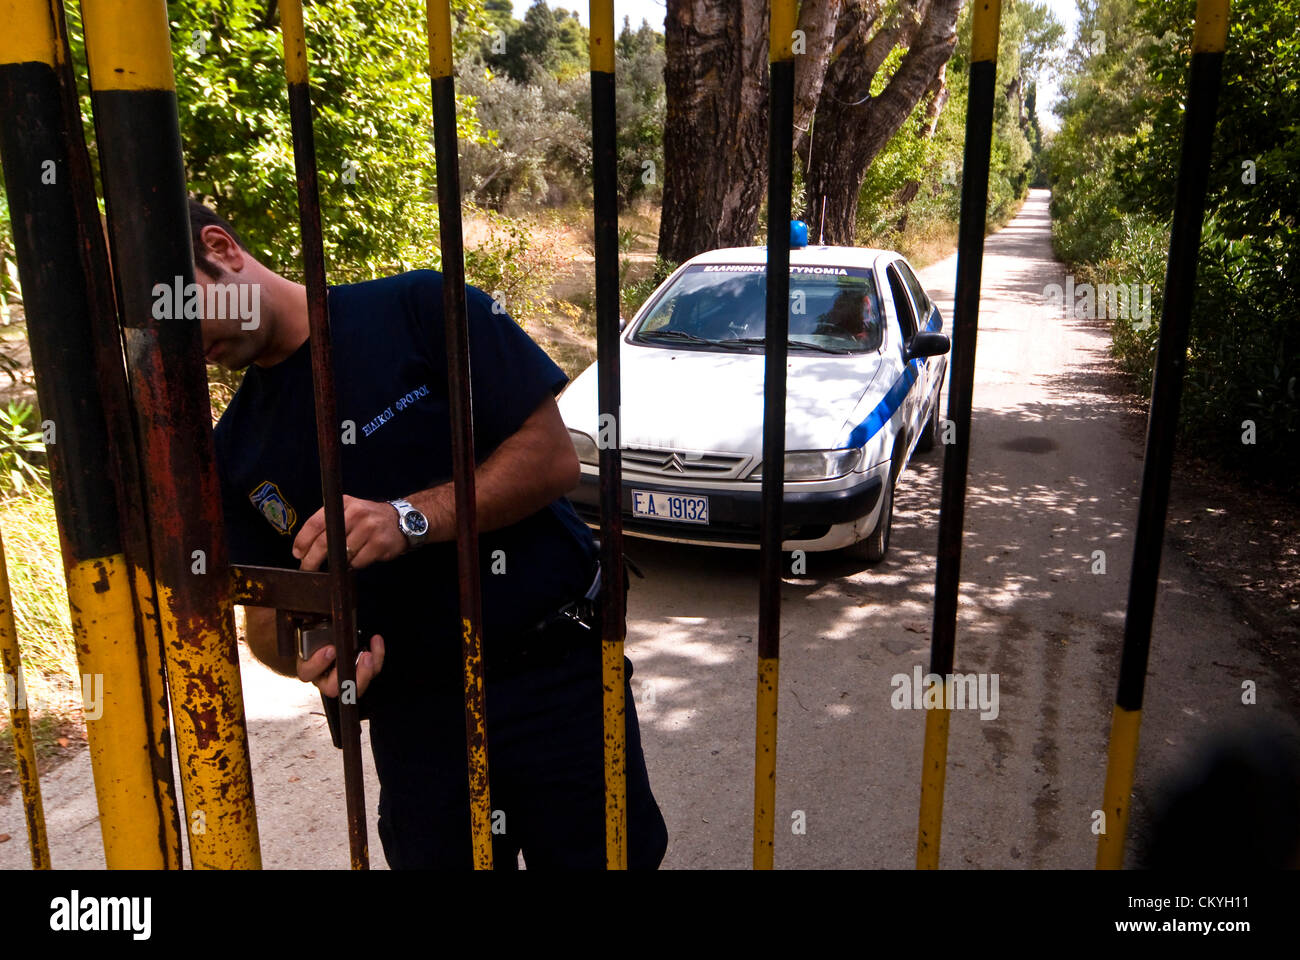 Police officer opening the Gate -  Tatoi was originally the Summer Residence of the Greek Royal family which was eventually used as their year round home and the birthplace of King George II. The estate is located about 20kms north of Athens near to Dekeleia. About 1km from the main residency is the Greek Royal Cemetery. Part of the estate is also the royal farms. Photos from 2008. September 3rd 2012. Athens, Greece. The Greek government announced this week that the former Royal Estate of Tatoi was to be put up for sale or lease by the state privatization fund (TAIPED). Stock Photo